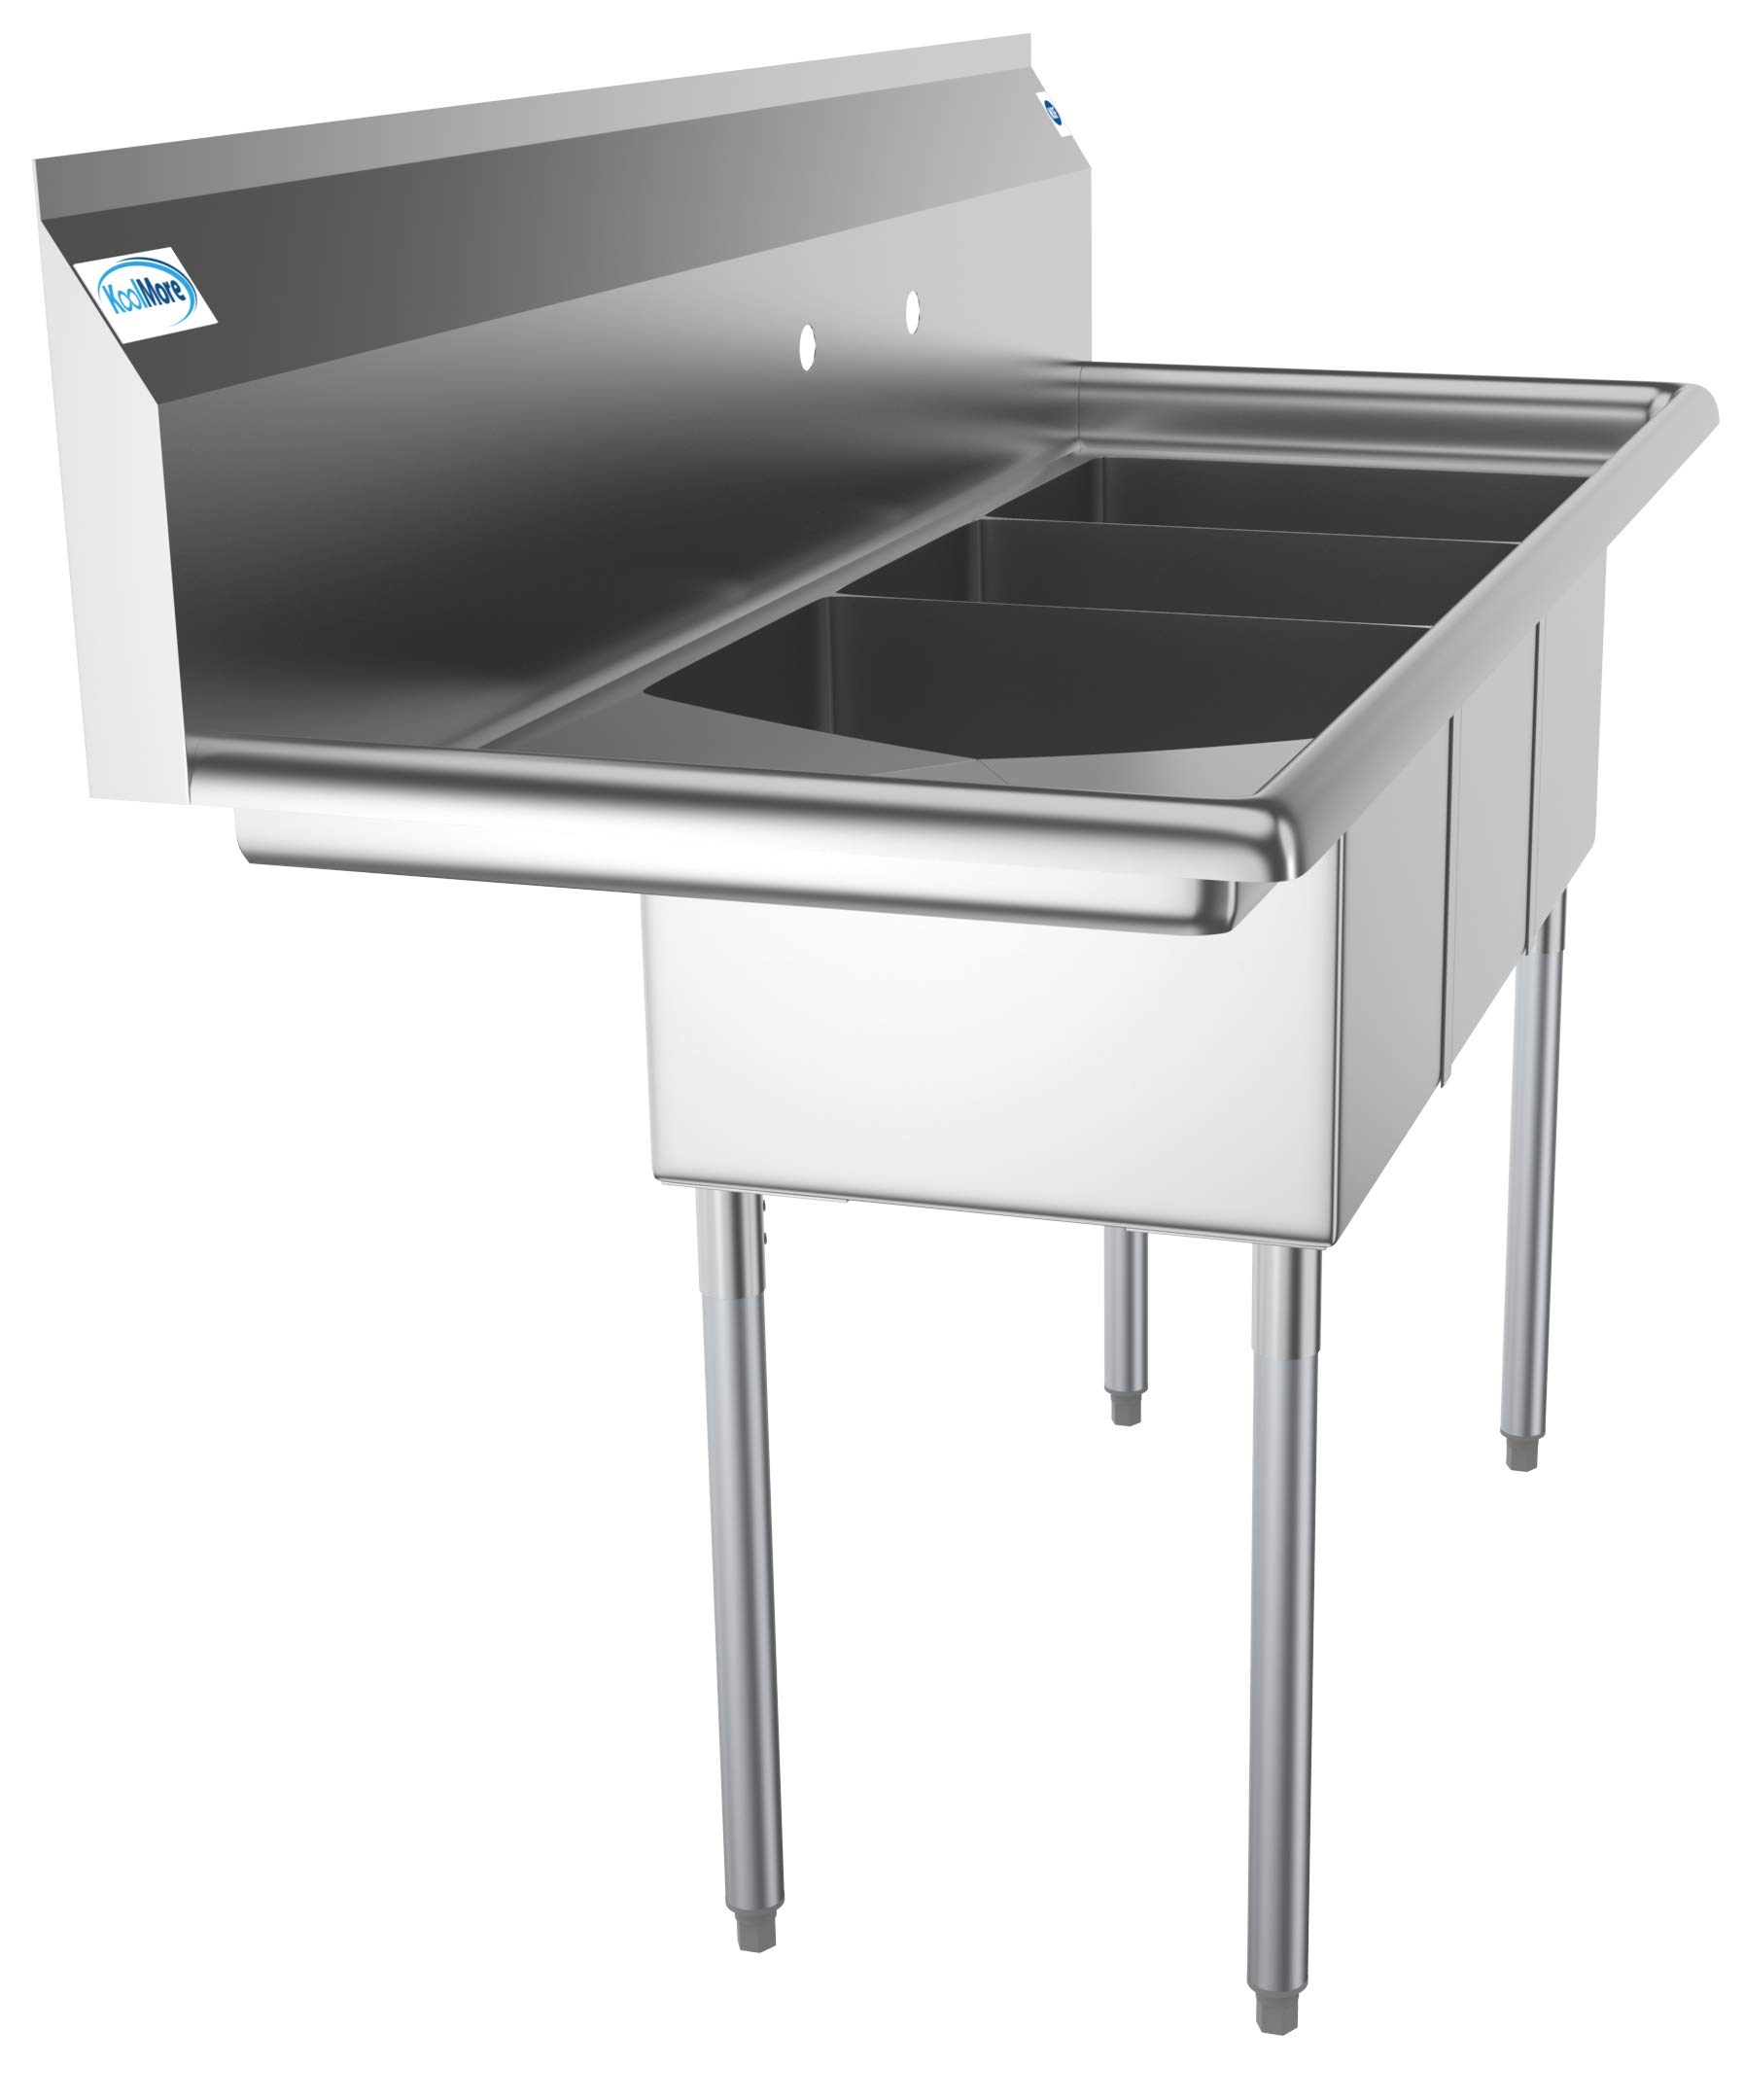 KoolMore 3 Compartment Stainless Steel Commercial Kitchen Sink with Large Drainboard - Bowl Size 12" x 16" x 10", Silver